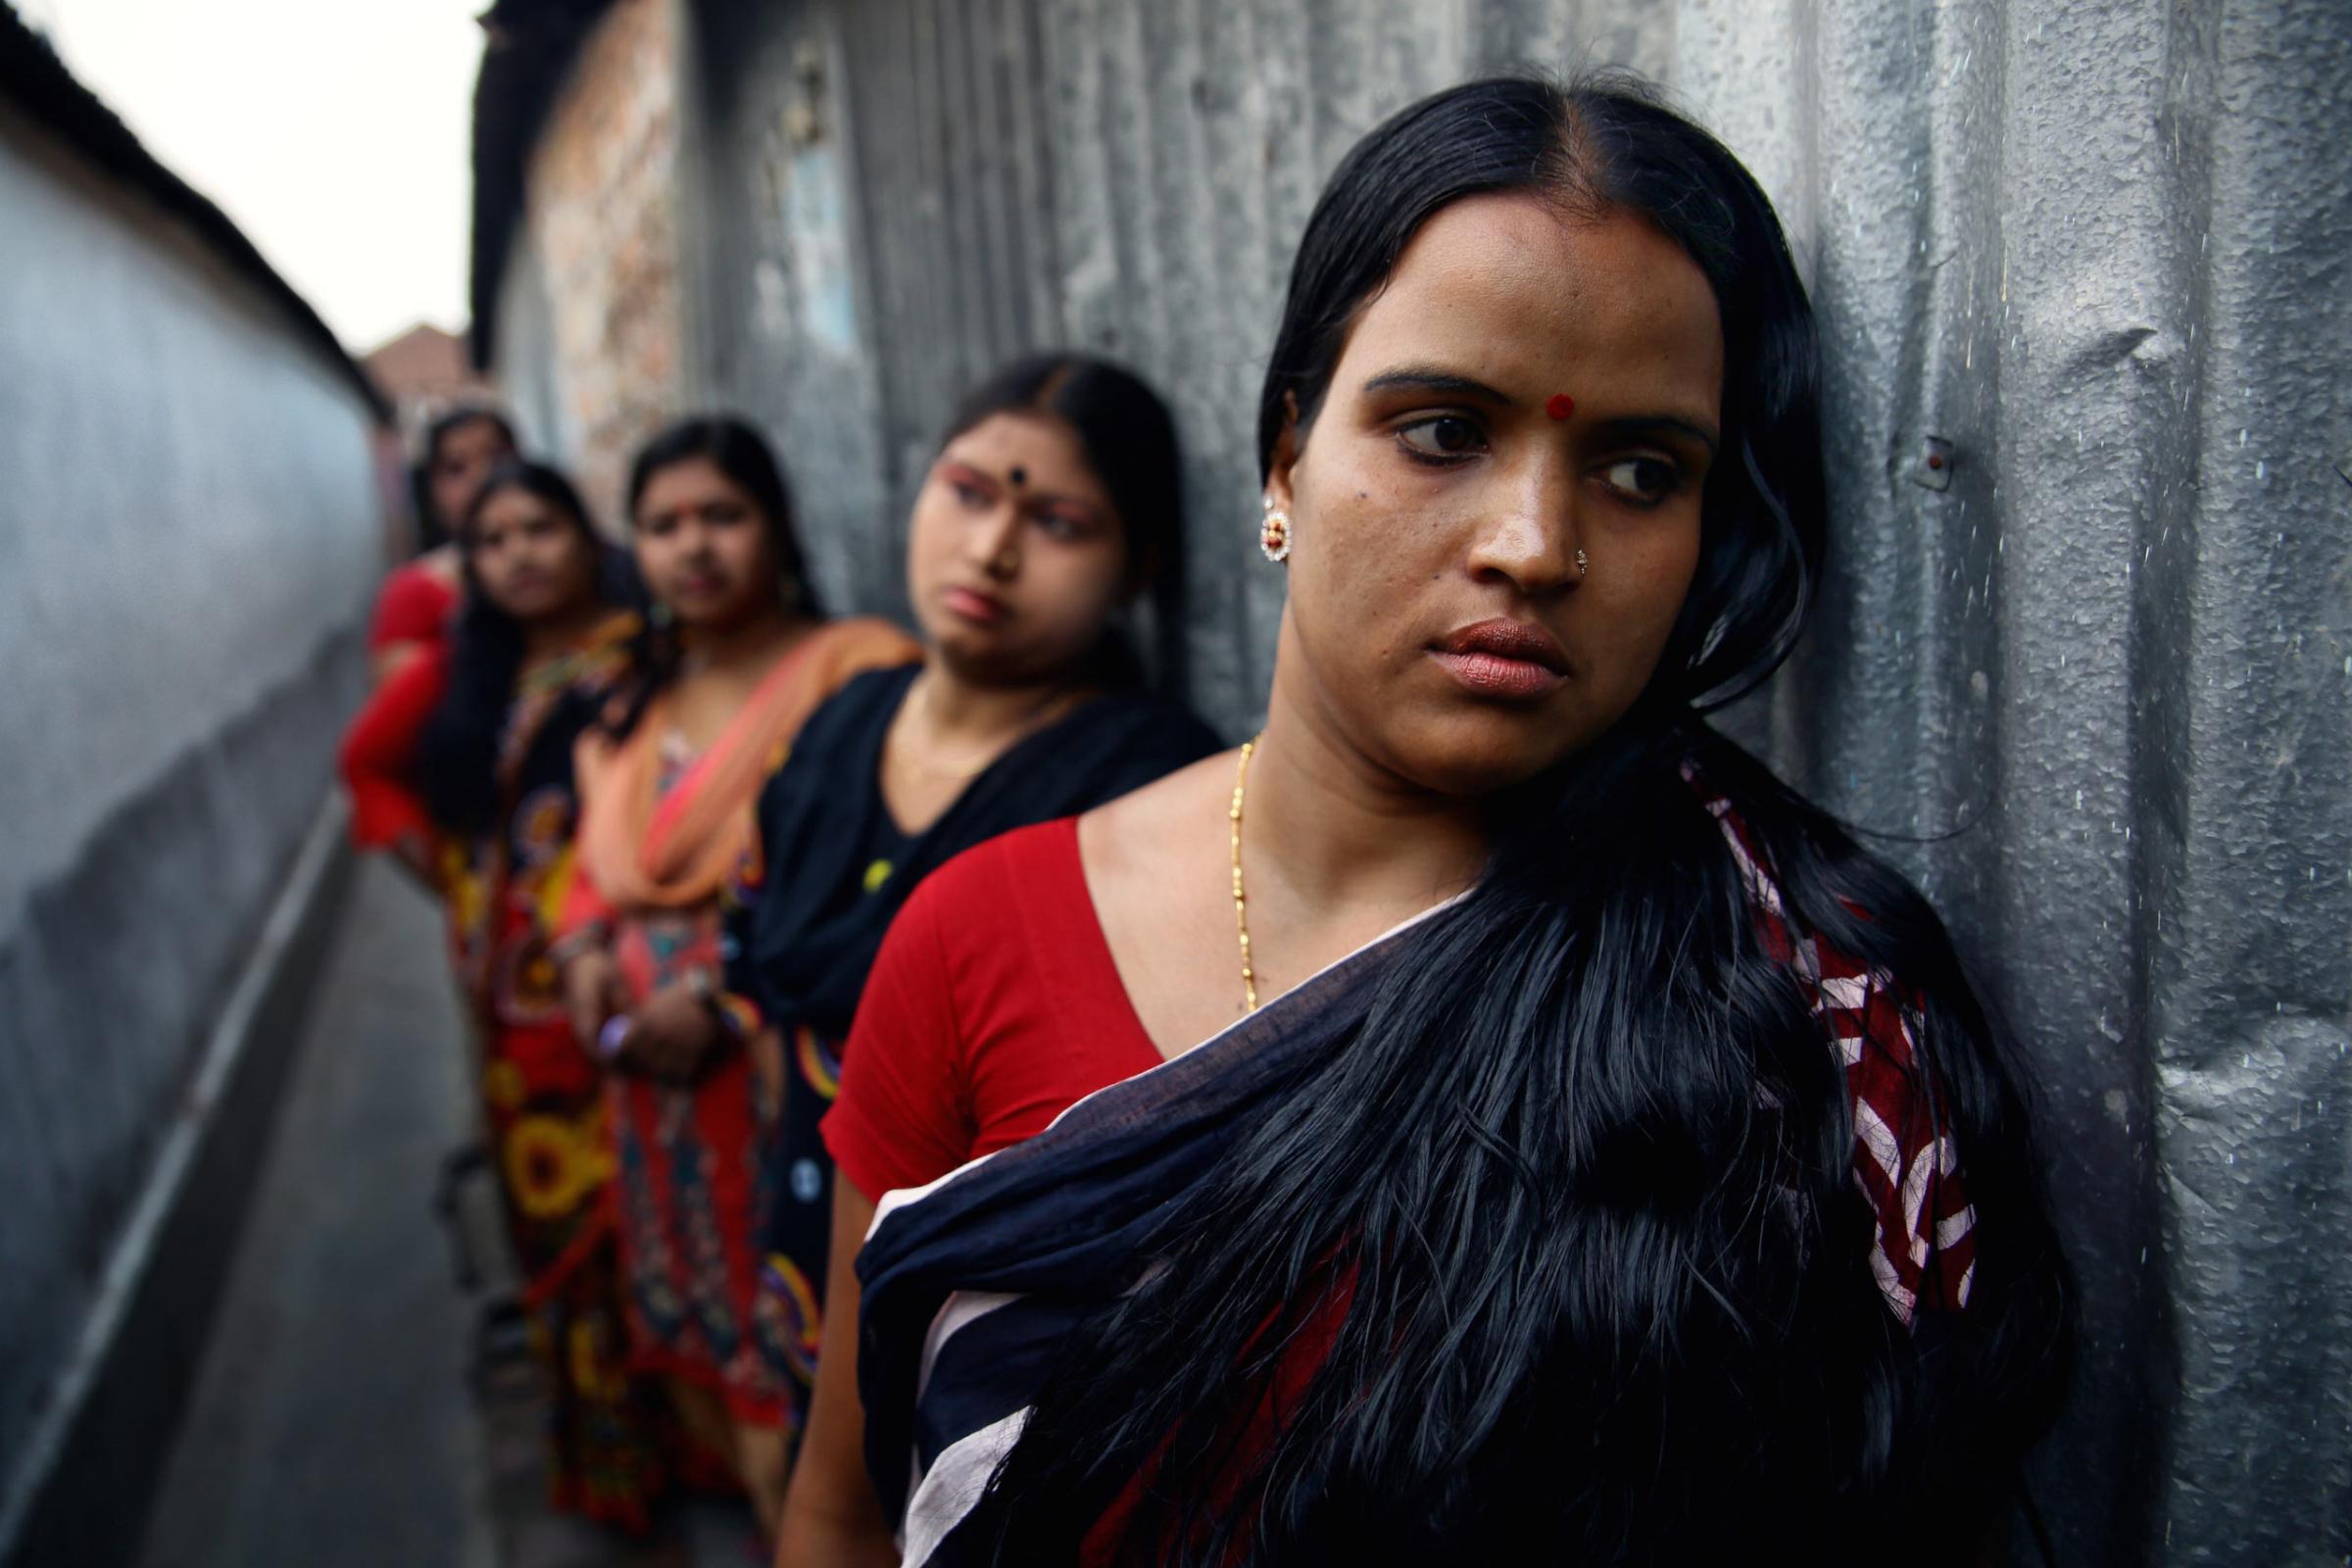 Jyotsna, 29, leads a line of sex workers, awaiting lunch customers in an alleyway of Sonagachi.